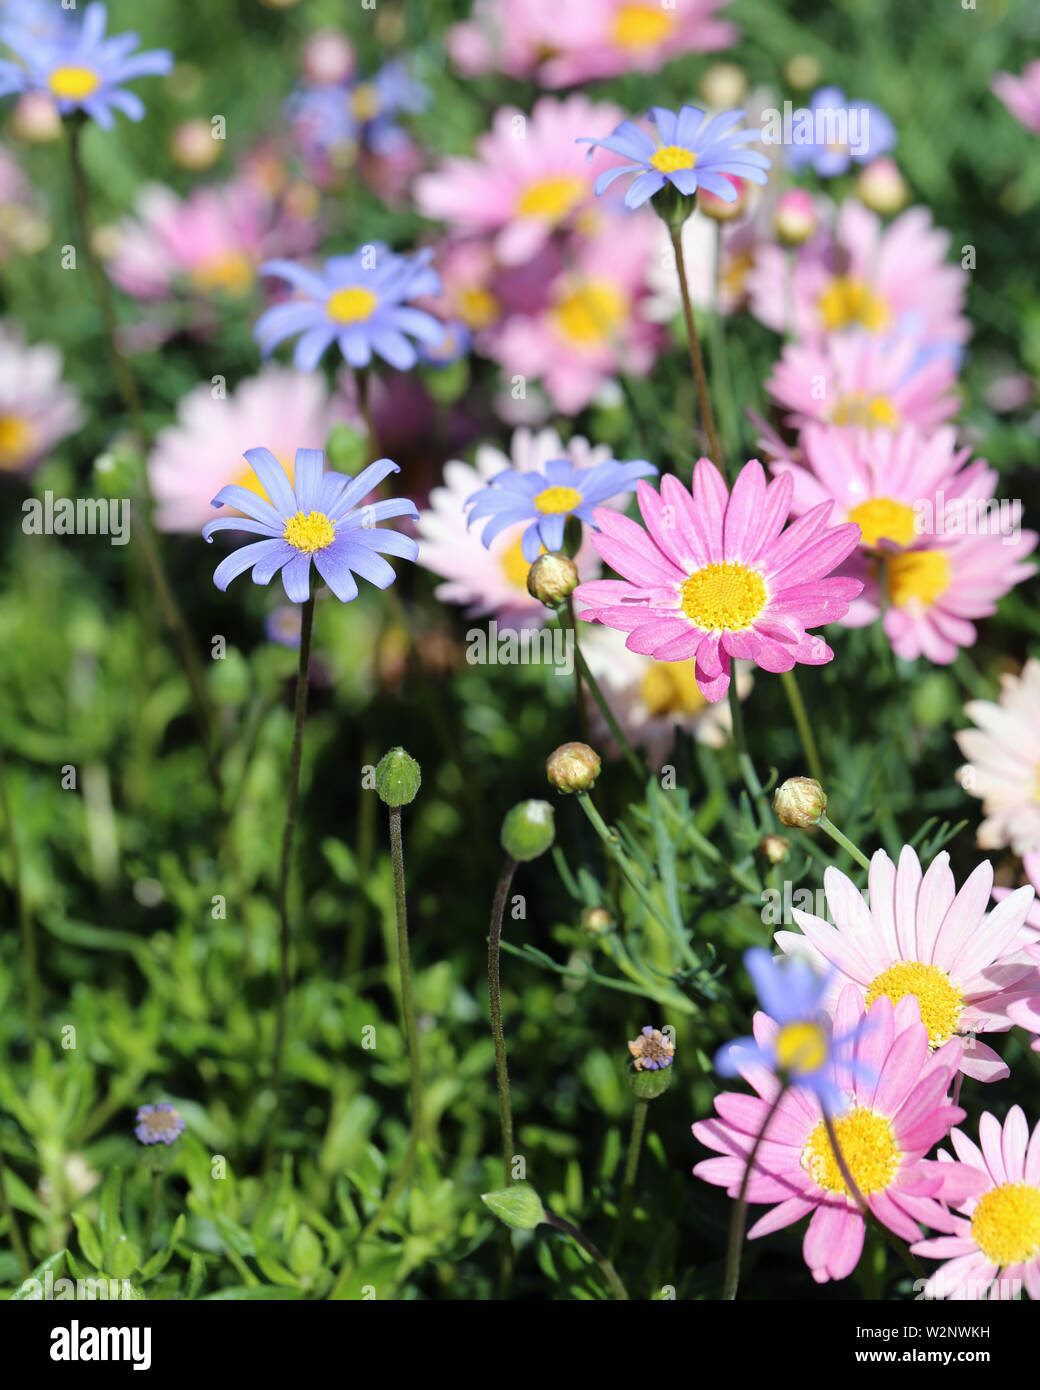 Pink and light blue / purple daisy flowers photographed in a meadow located in Funchal, Madeira. The photo includes a lot of lovely bright flowers. Stock Photo